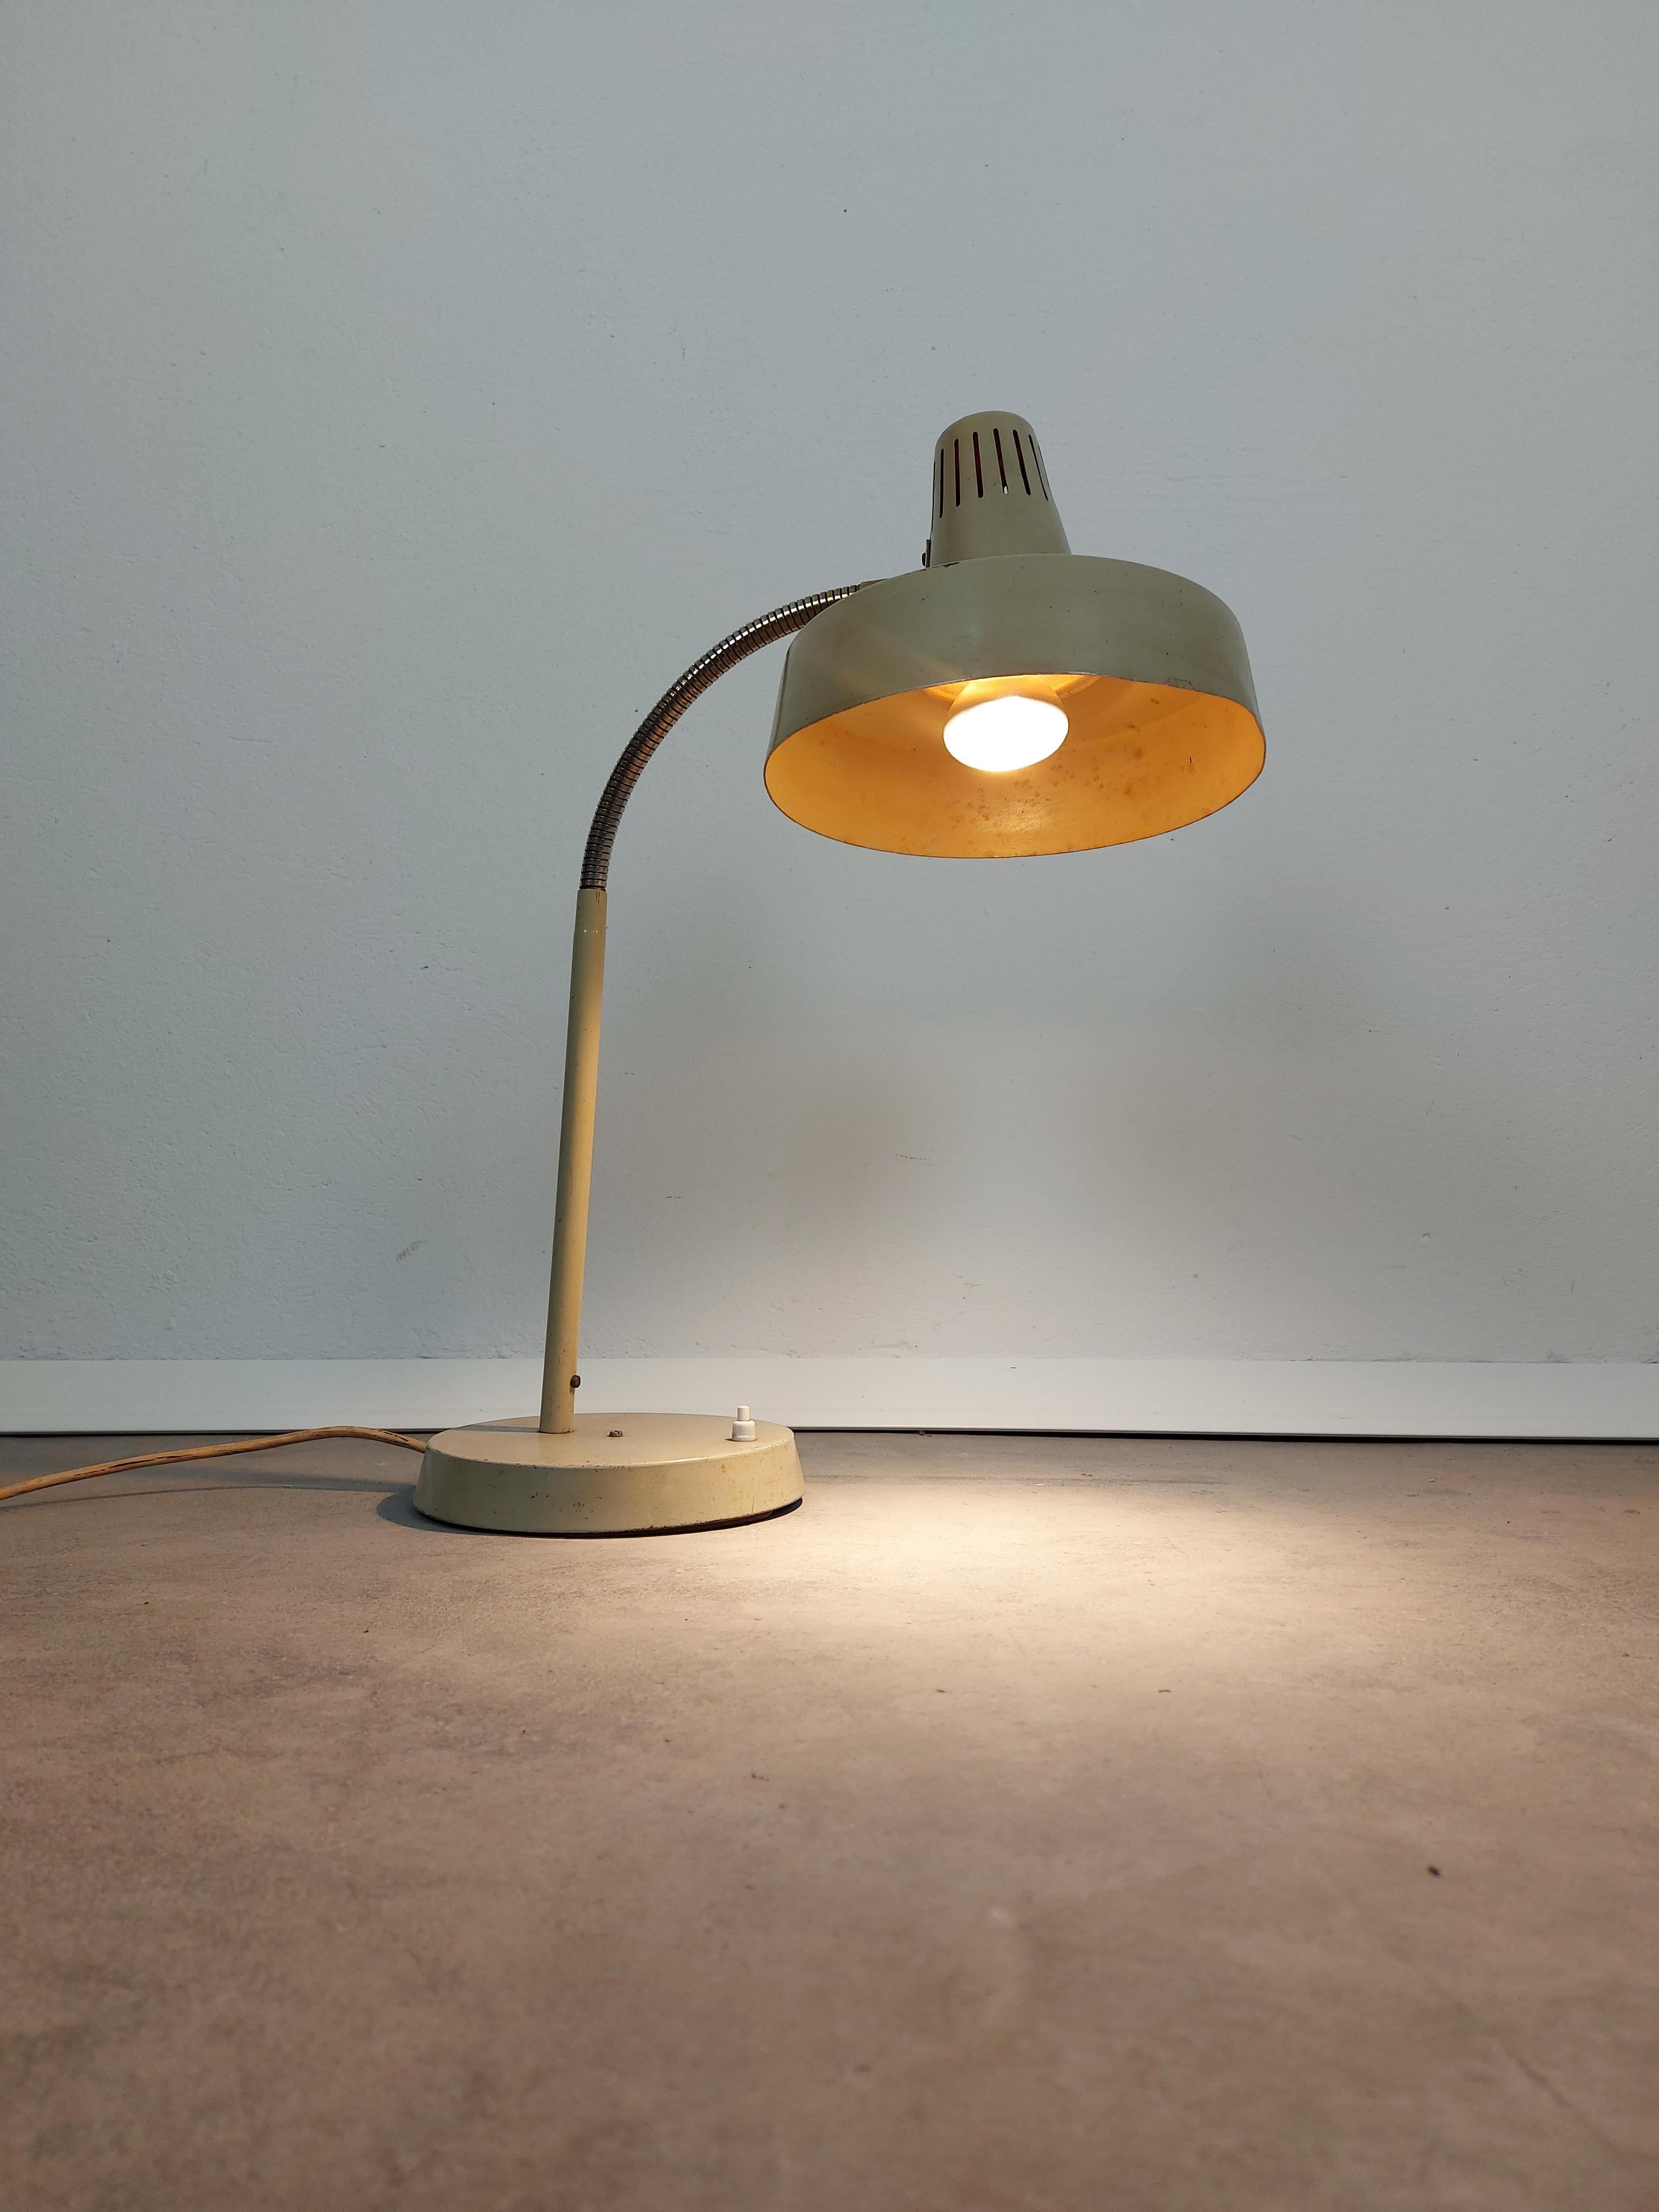 Desk lamp/table lamp, 1970s

Period: 1970s

Style: midcentury modern design

Colour: beige

Material: metal

Condition: original vintage condition with slight traces of use, fully finctional.